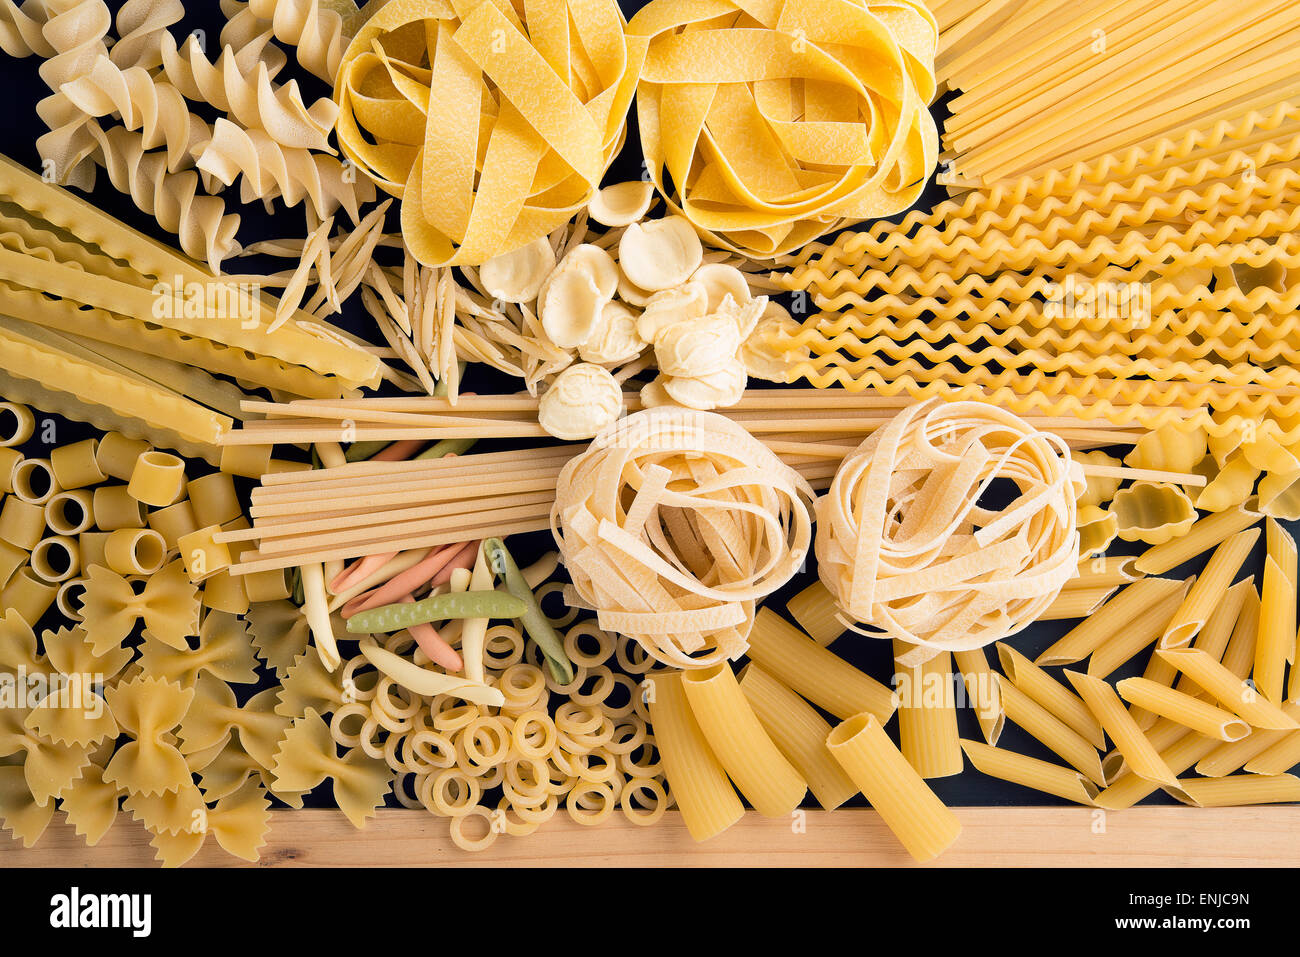 raw pasta on a wooden board, ready to be cooked Stock Photo